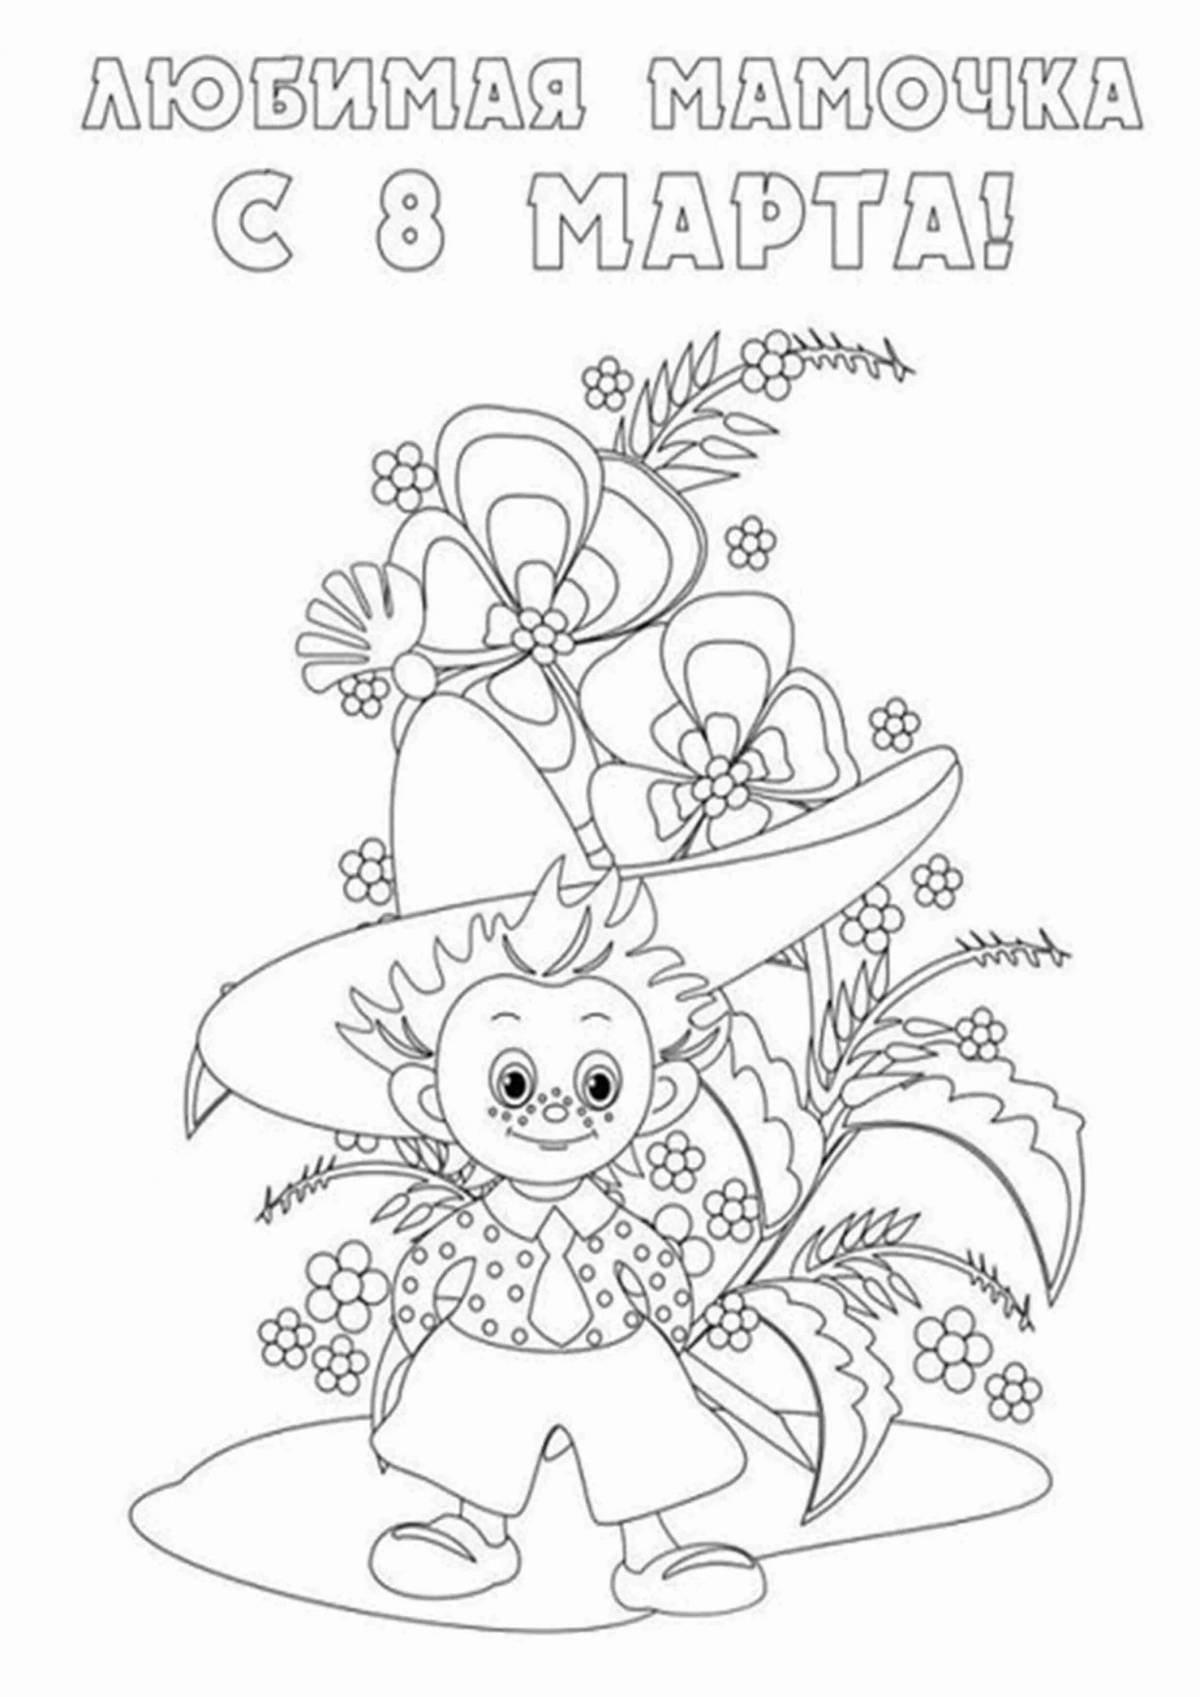 Merry 8 March coloring book for kids 7-8 years old